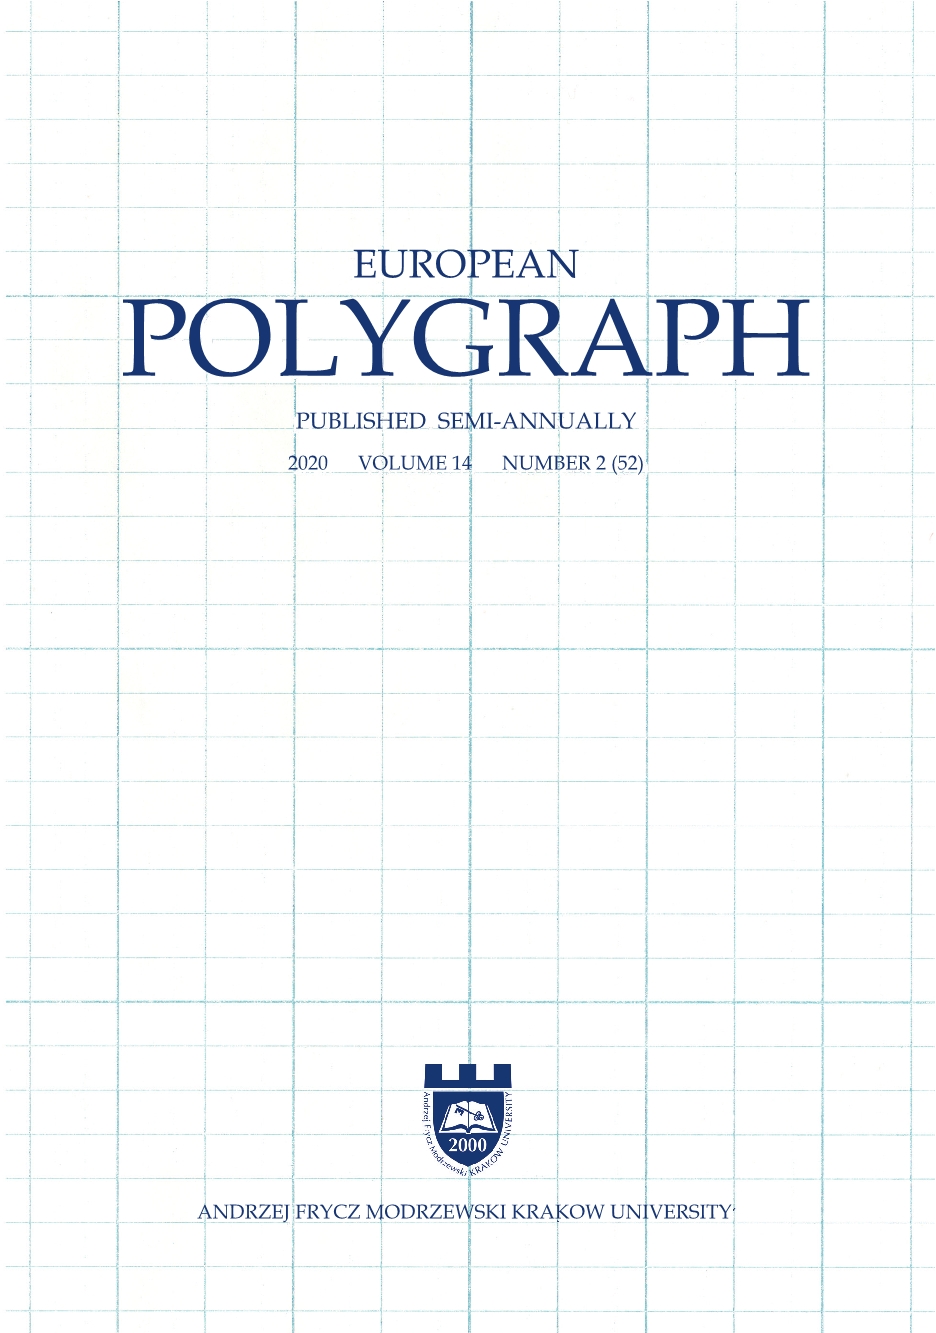 Polygraph: The Use of Polygraphy in the Assessment and Treatment of Sex Offenders in the UK